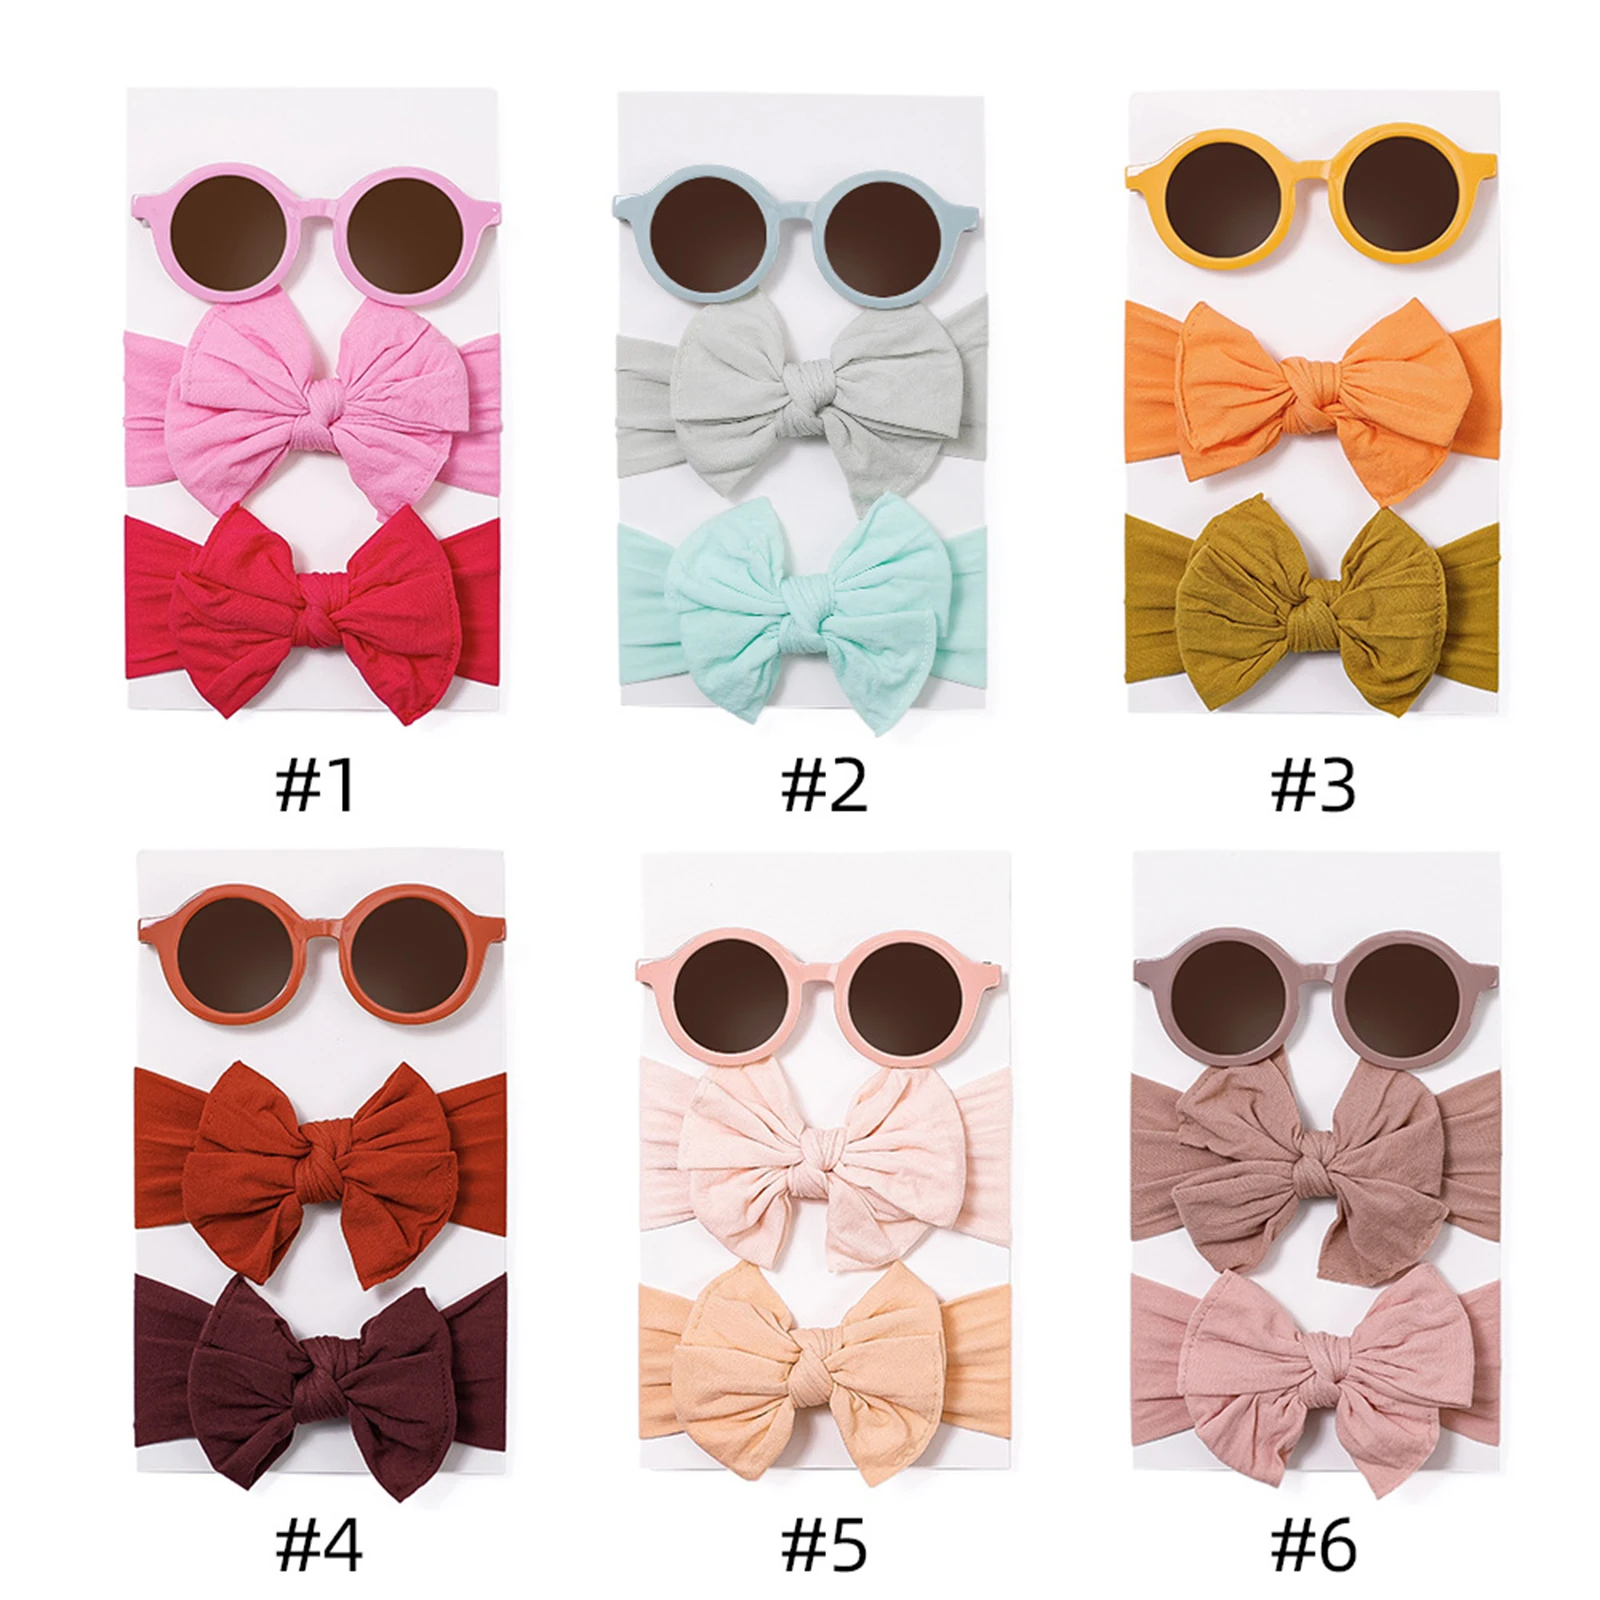 EWODOS Baby Kids Girls Headwear Sets Sunglasses with Headbands Round Sunglasses with Bow Hairbands Party Favor for Baby Kids